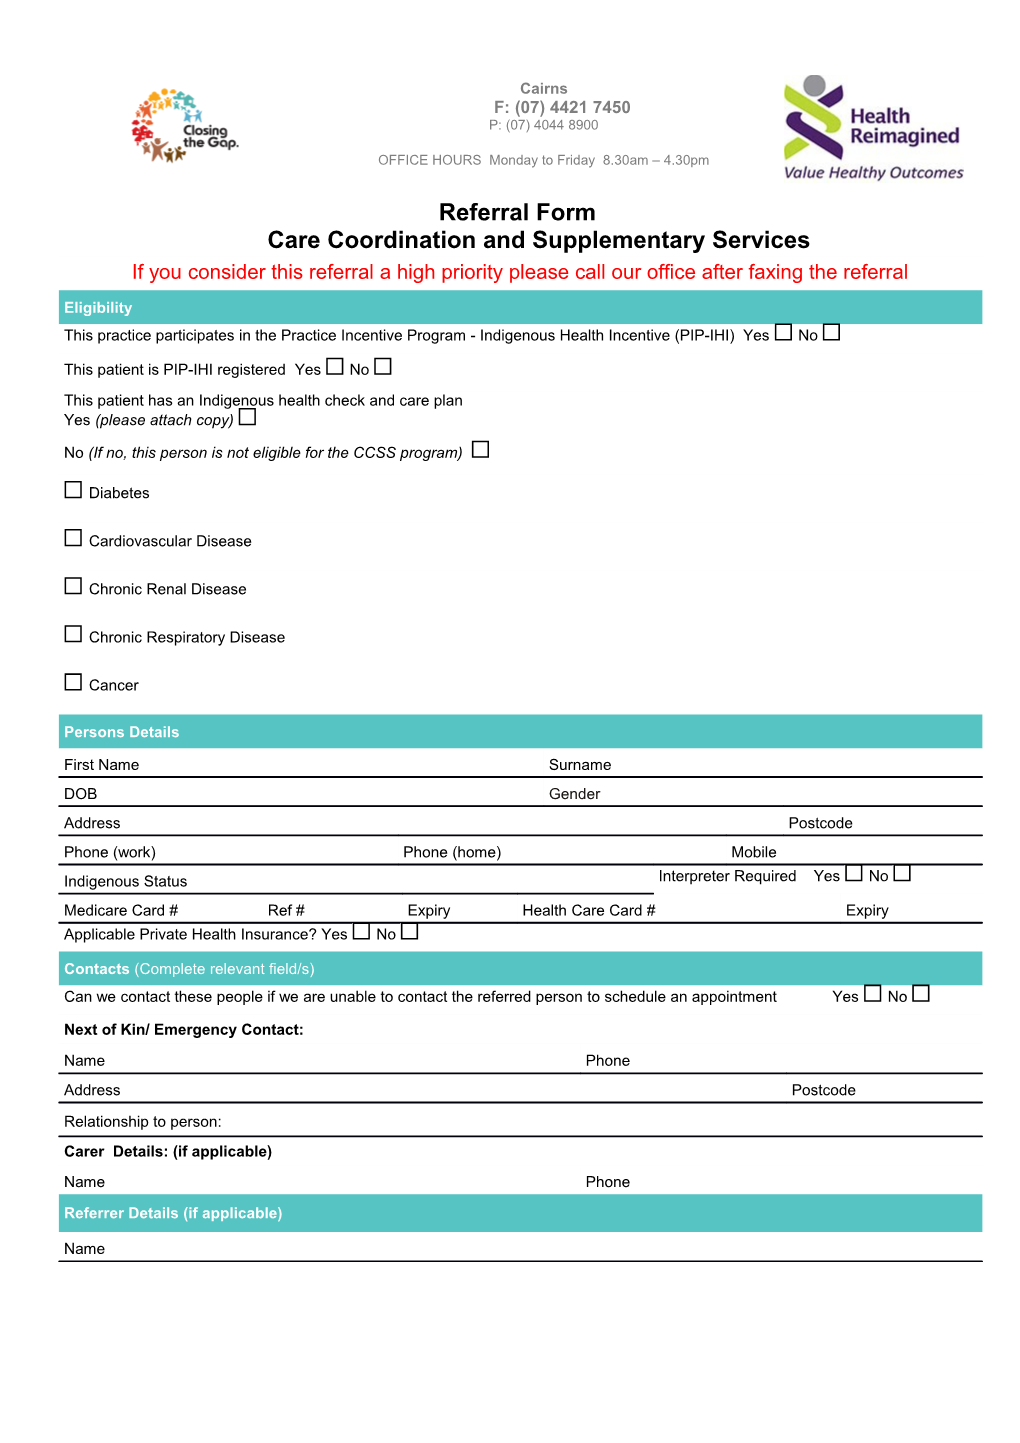 Referral Form Care Coordination and Supplementary Services